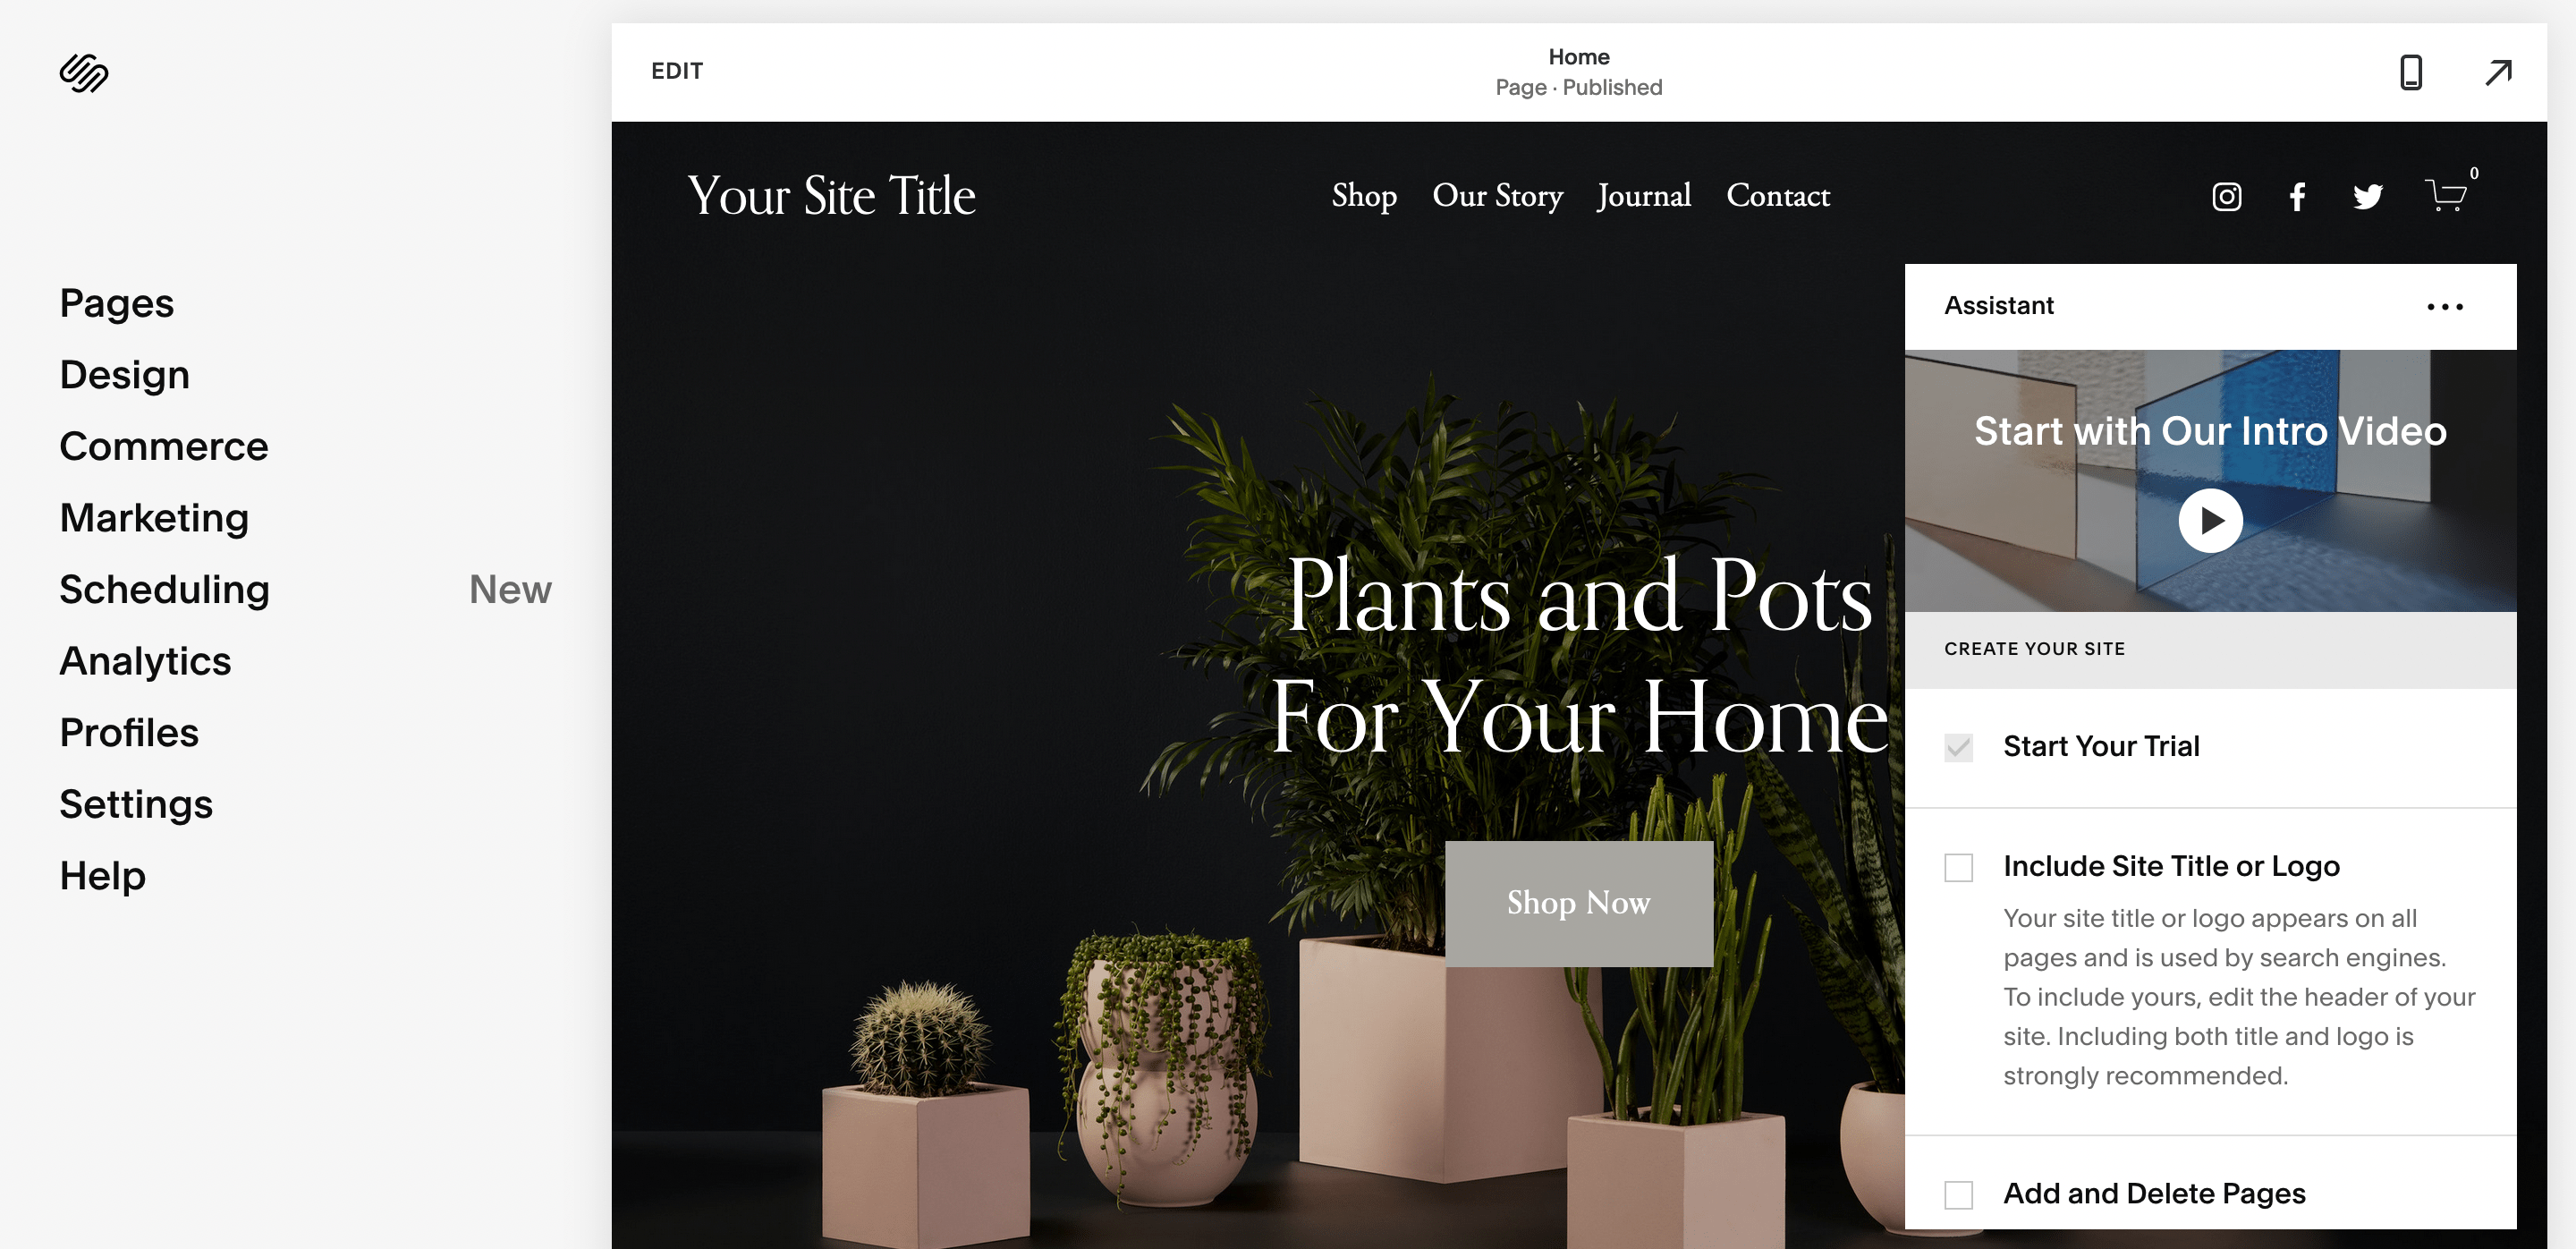 The main Squarespace edit page.